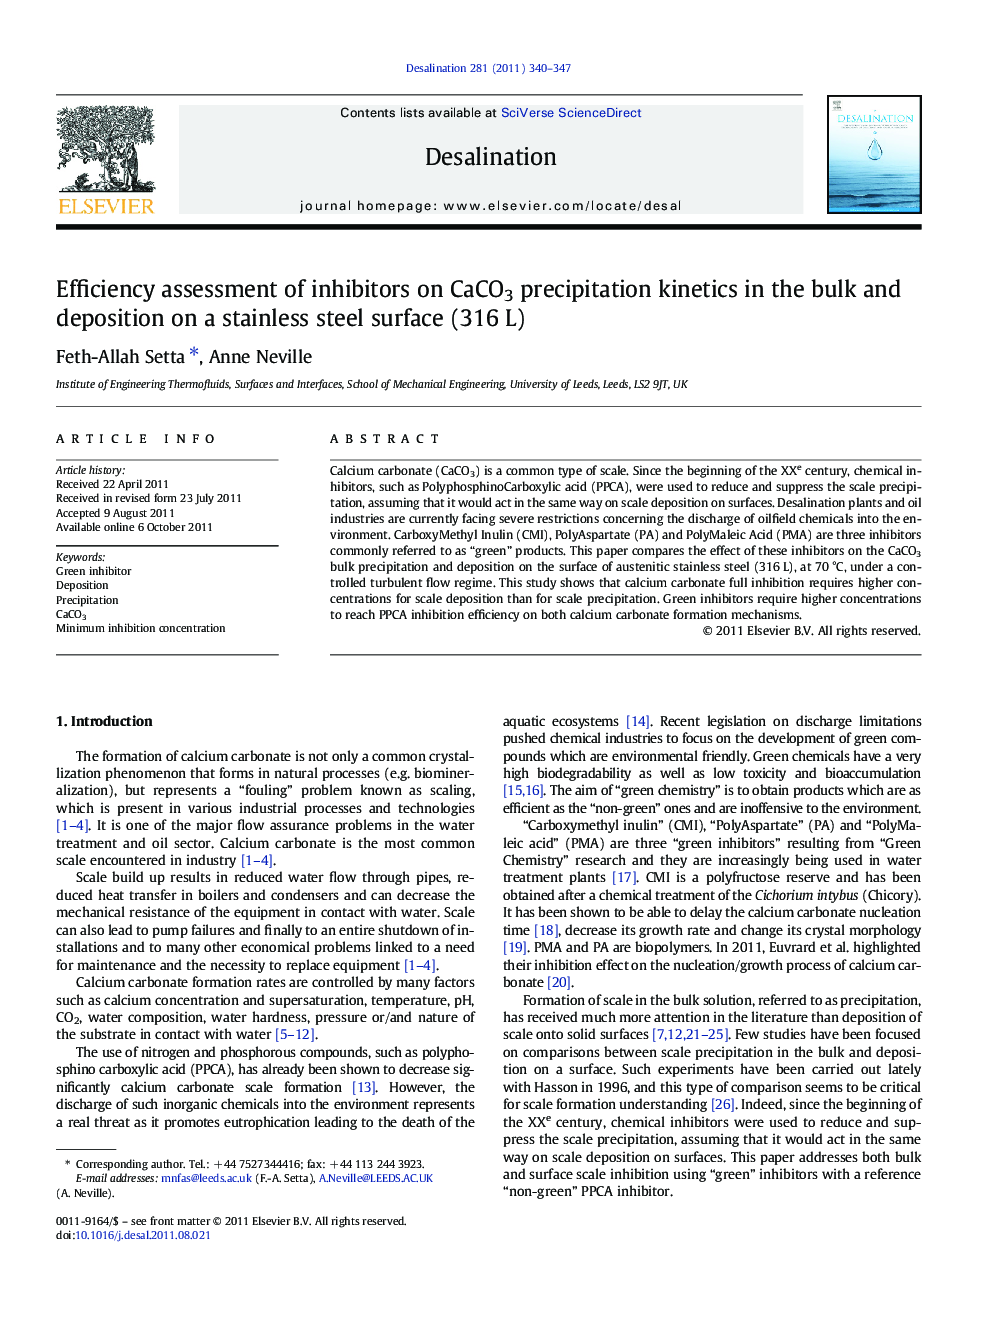 Efficiency assessment of inhibitors on CaCO3 precipitation kinetics in the bulk and deposition on a stainless steel surface (316 L)